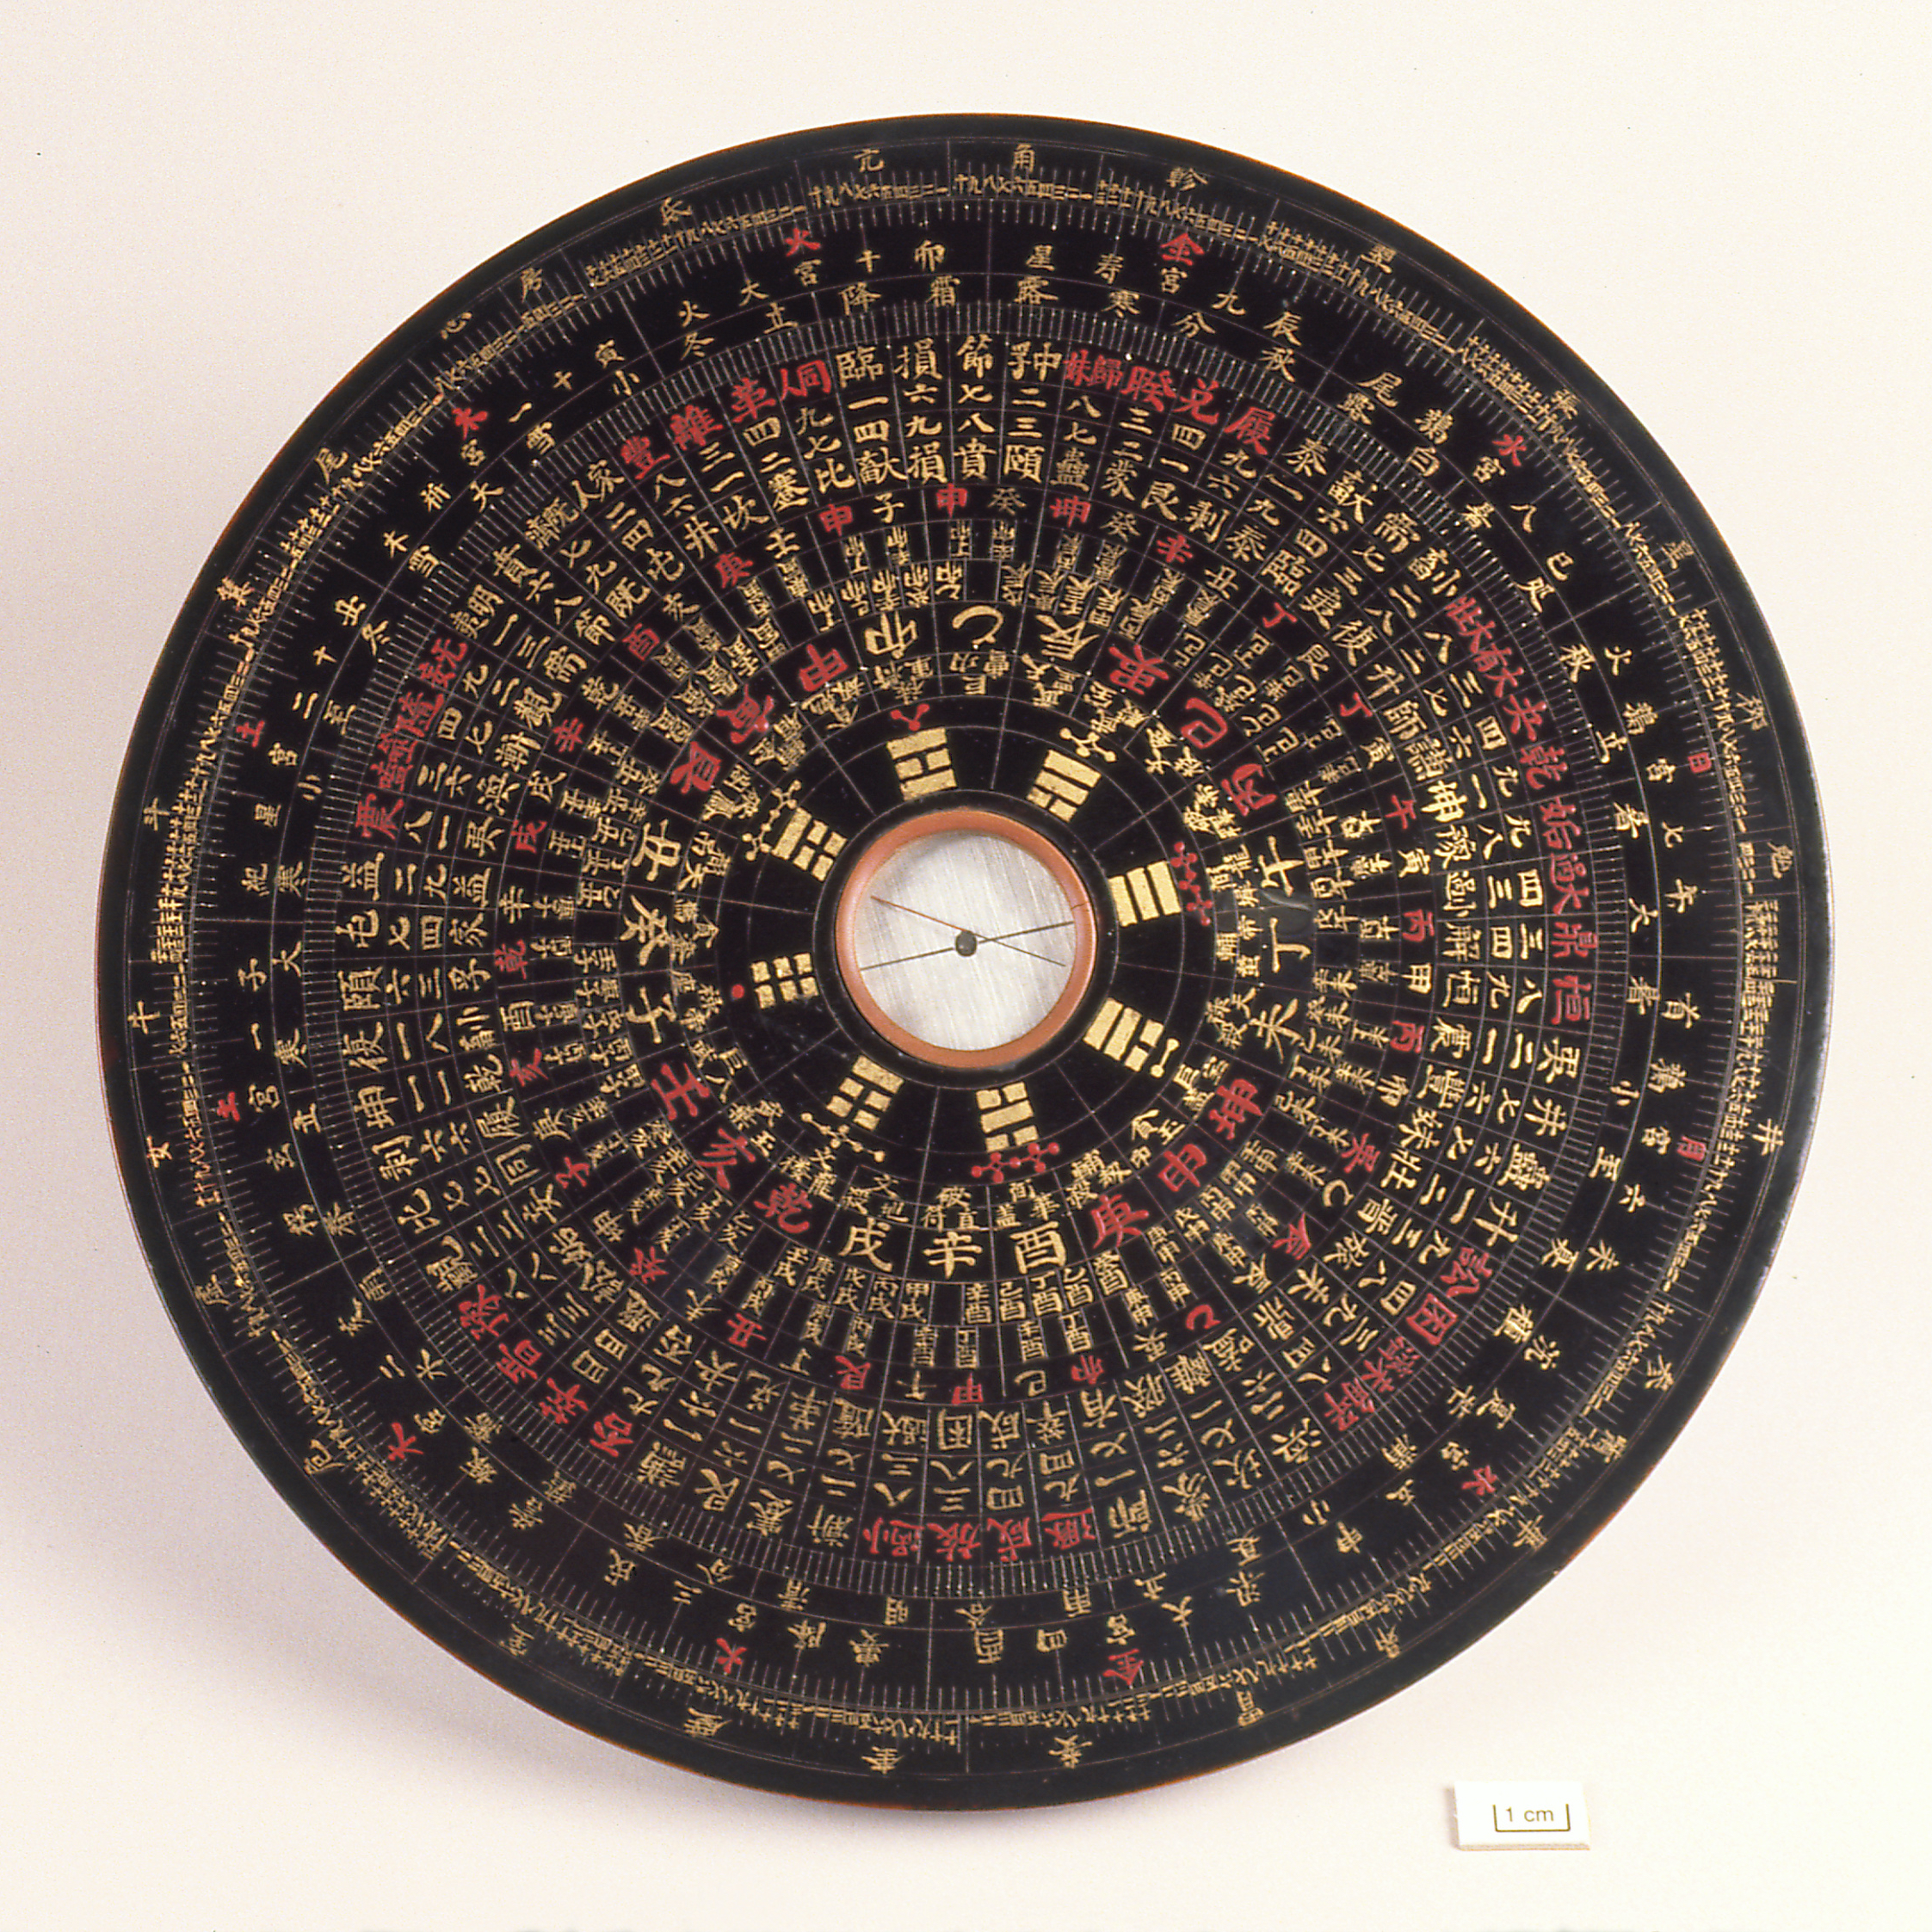 19th century Chinese astrological compass_DF_5271